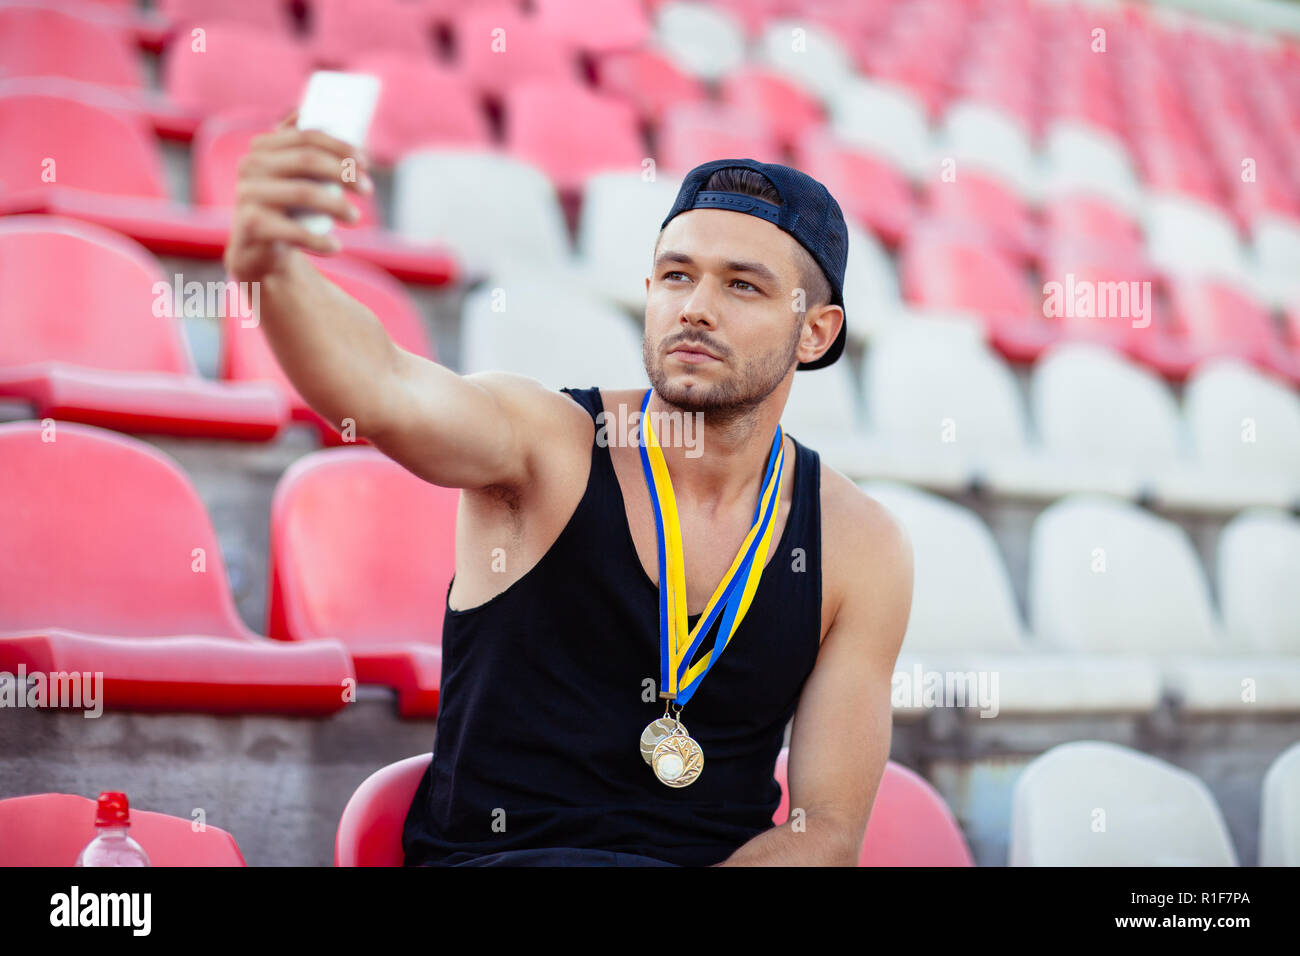 Proud winner with medals making selfie. Champion takes moment of triumph. Victory concept Stock Photo